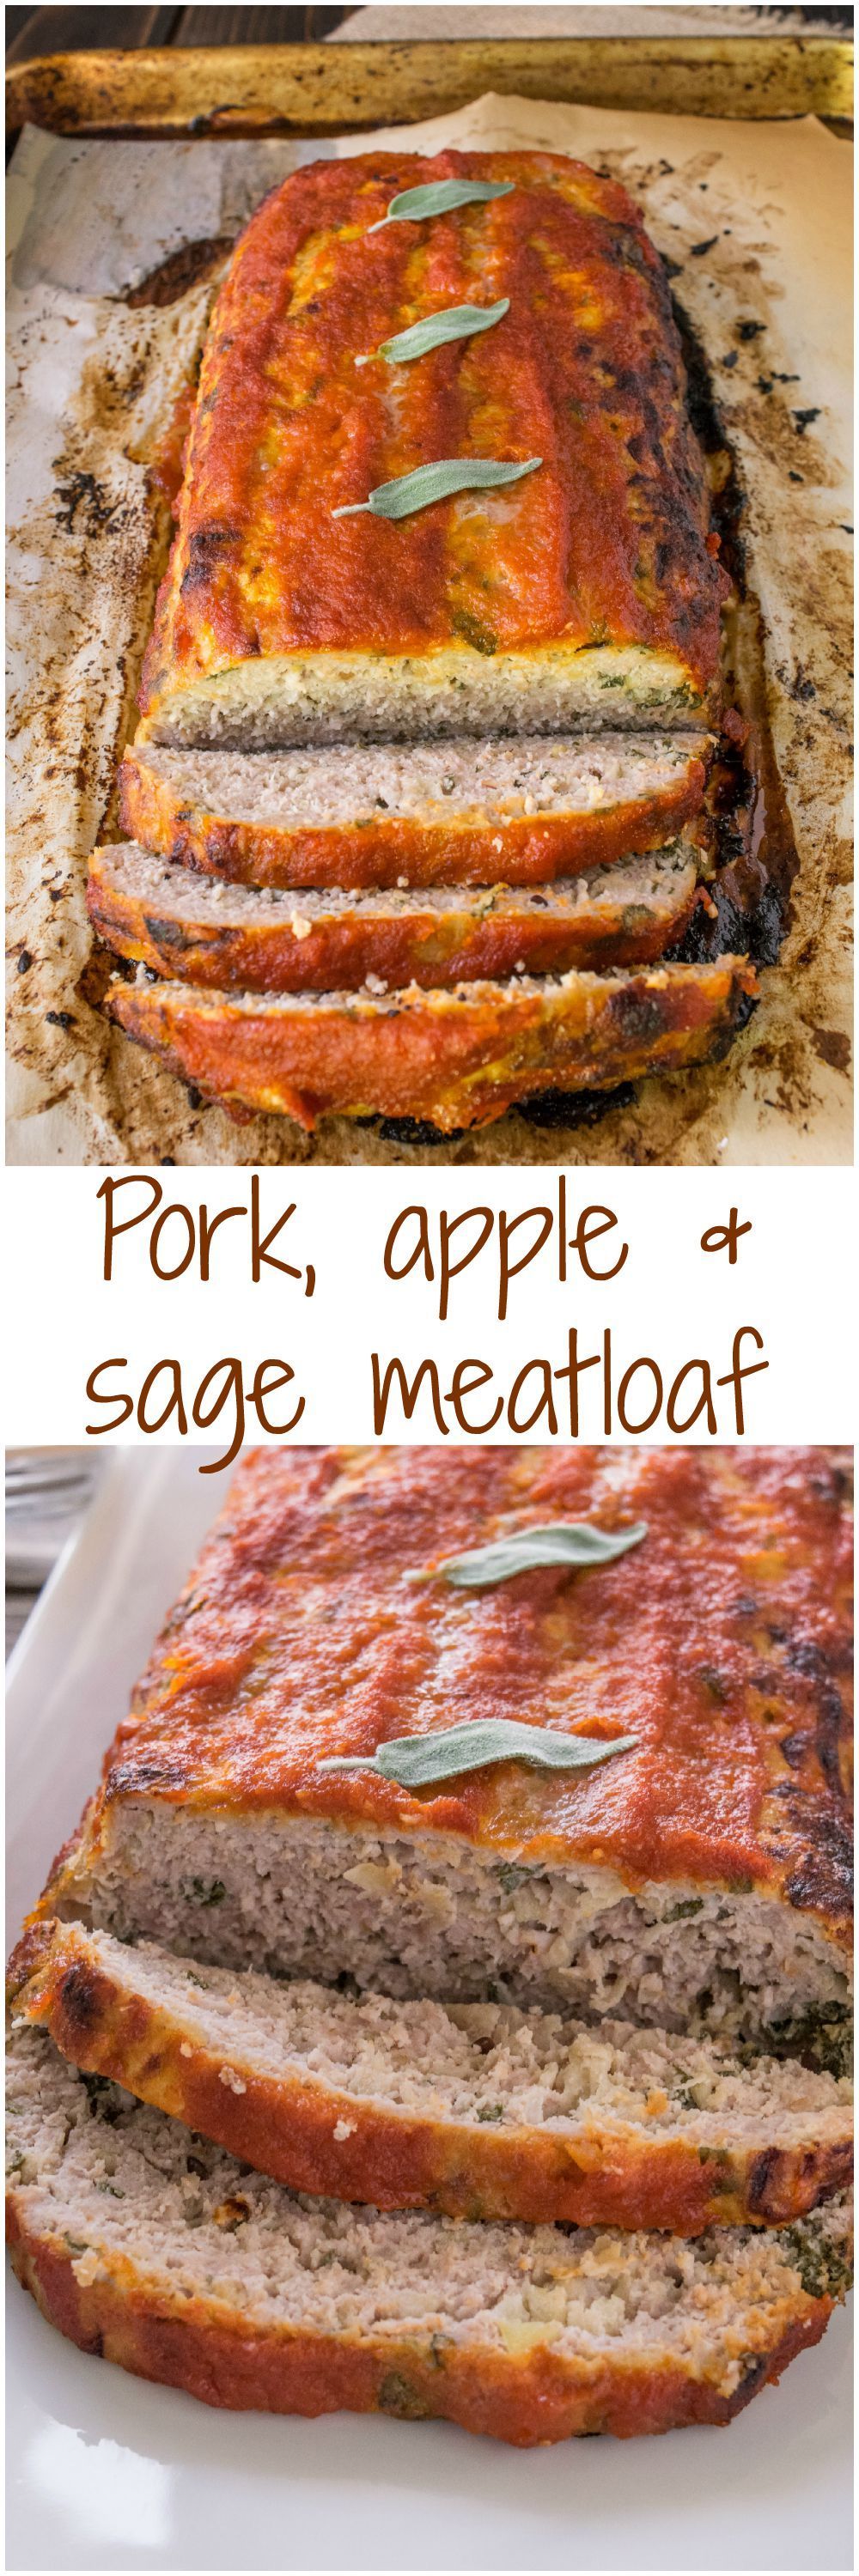 Pork, apple & sage meatloaf. Delicious Autumn flavors in a comforting…